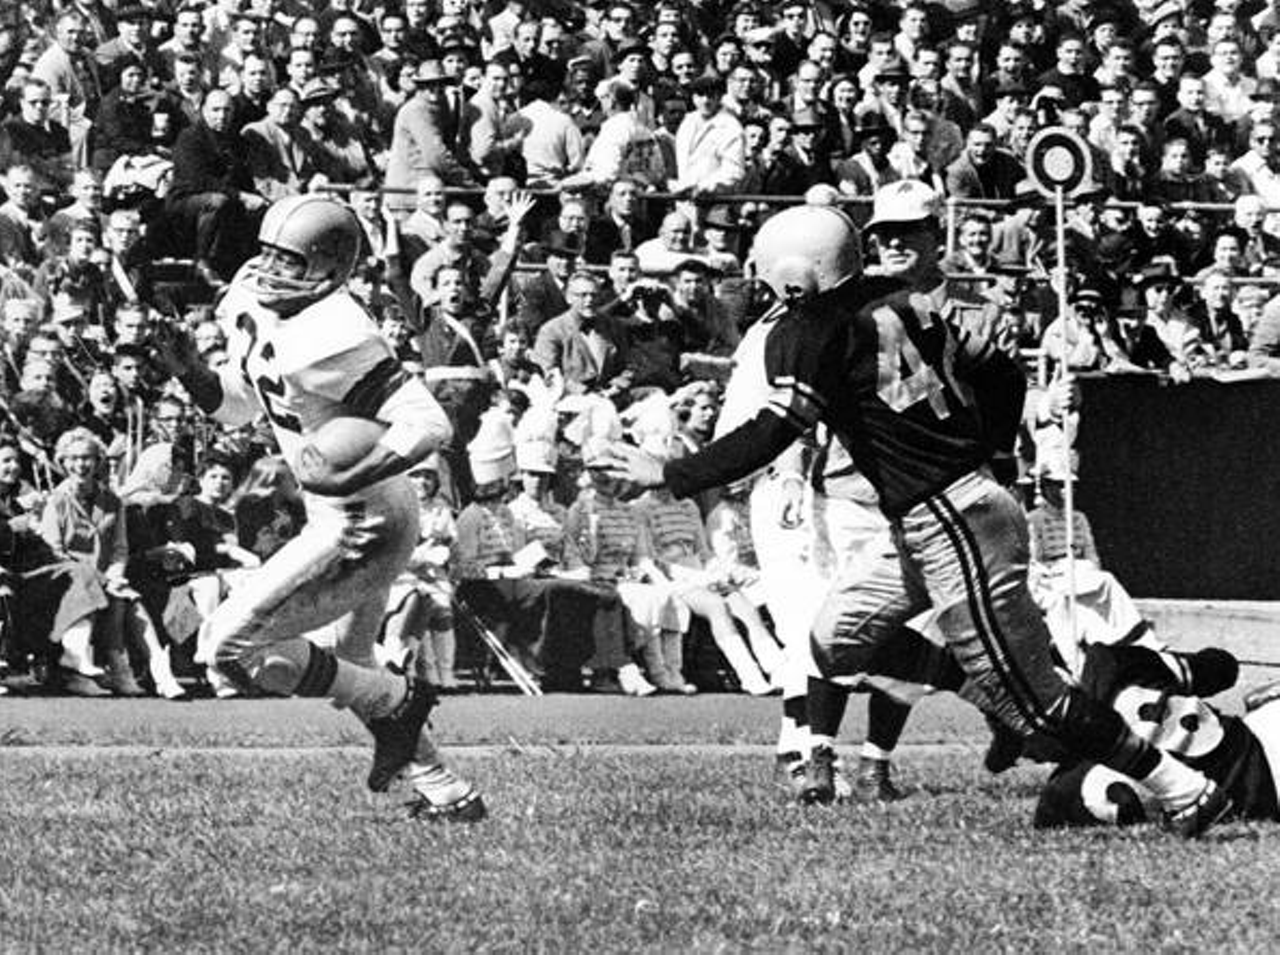 Cleveland Browns vs. Pittsburgh Steelers- 1958
Final Score- Cleveland 45: Steelers 12
"Jim Brown comes back with a 129-yard, three-touchdown effort in a 45-12 rout of the Steelers at Pittsburgh. The game matches Brown with rookie Bobby Mitchell in a potentially lethal backfield. Mitchell rushes for 65 yards and takes a Milt Plum screen pass 21 yards for a TD. The Steelers commit nine turnovers in the first pro game at Pitt Stadium."